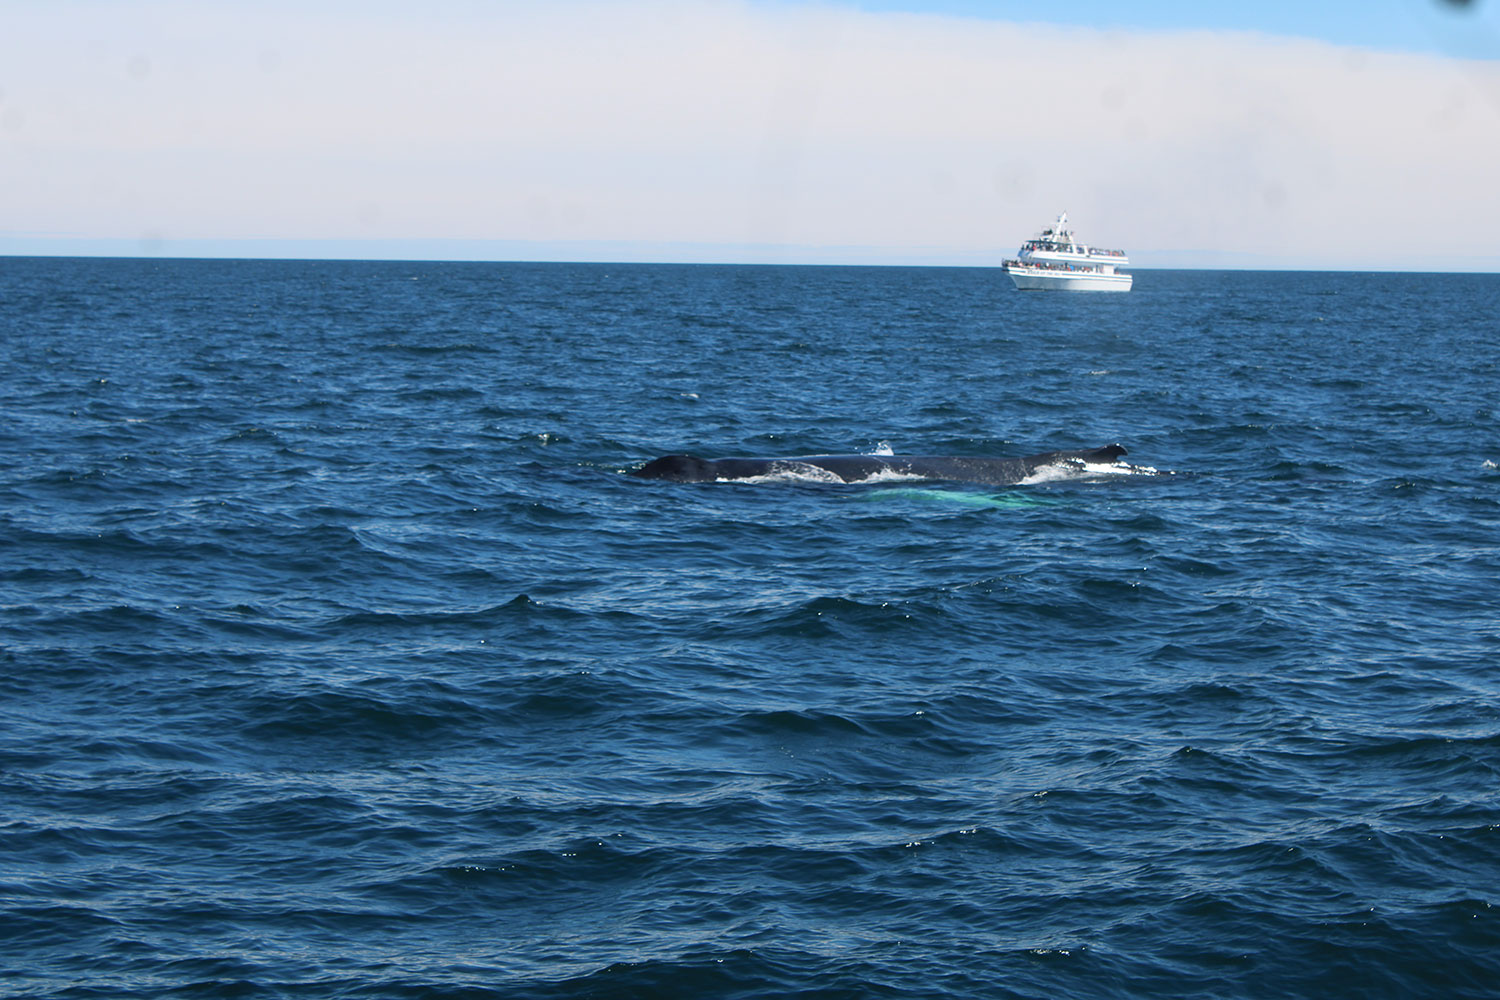 Whale Watching in Provincetown, MA